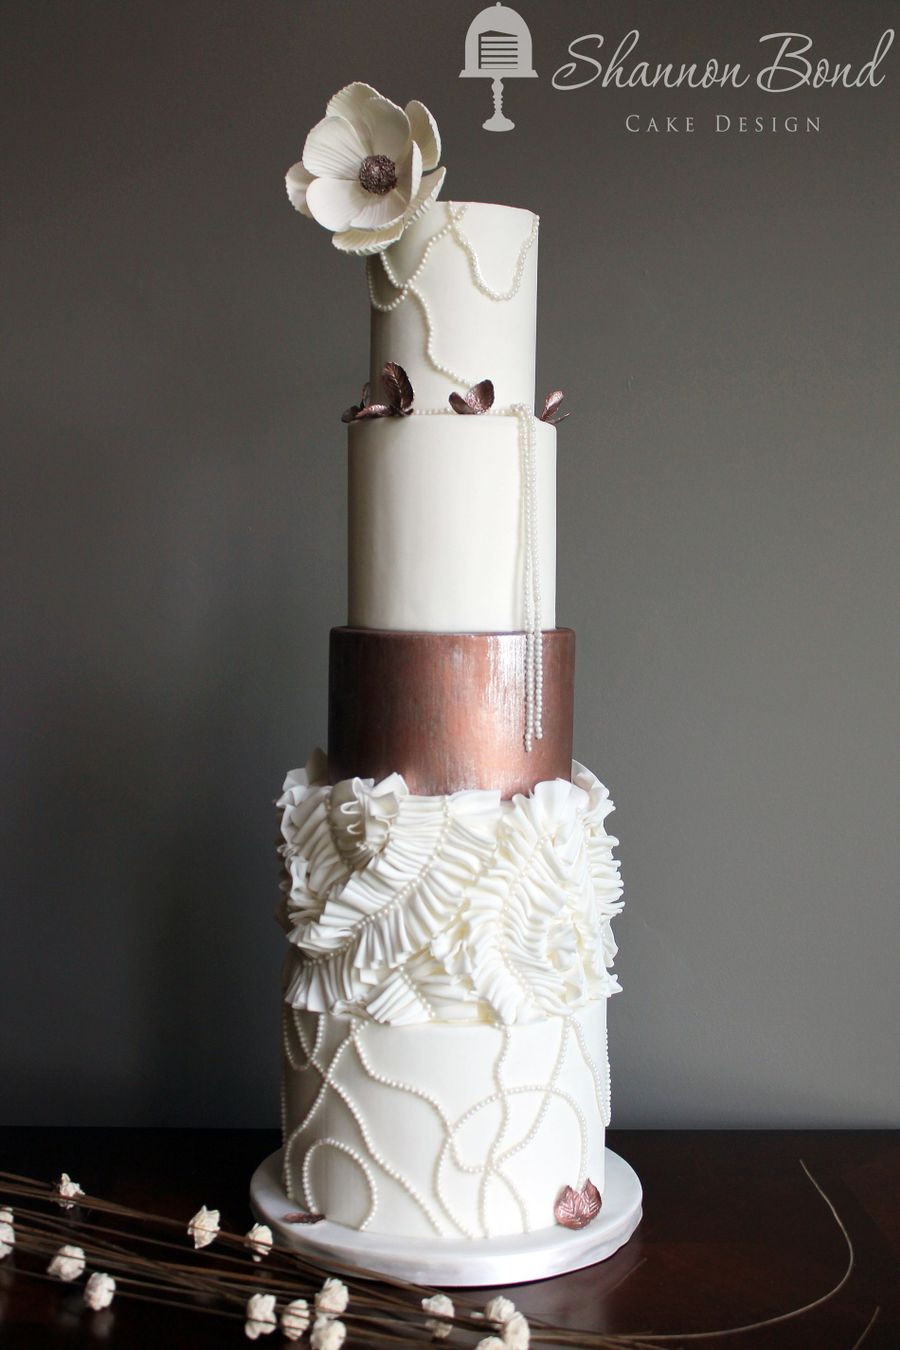 Coutoure Wedding Cakes
 Copper Couture Wedding Cake CakeCentral